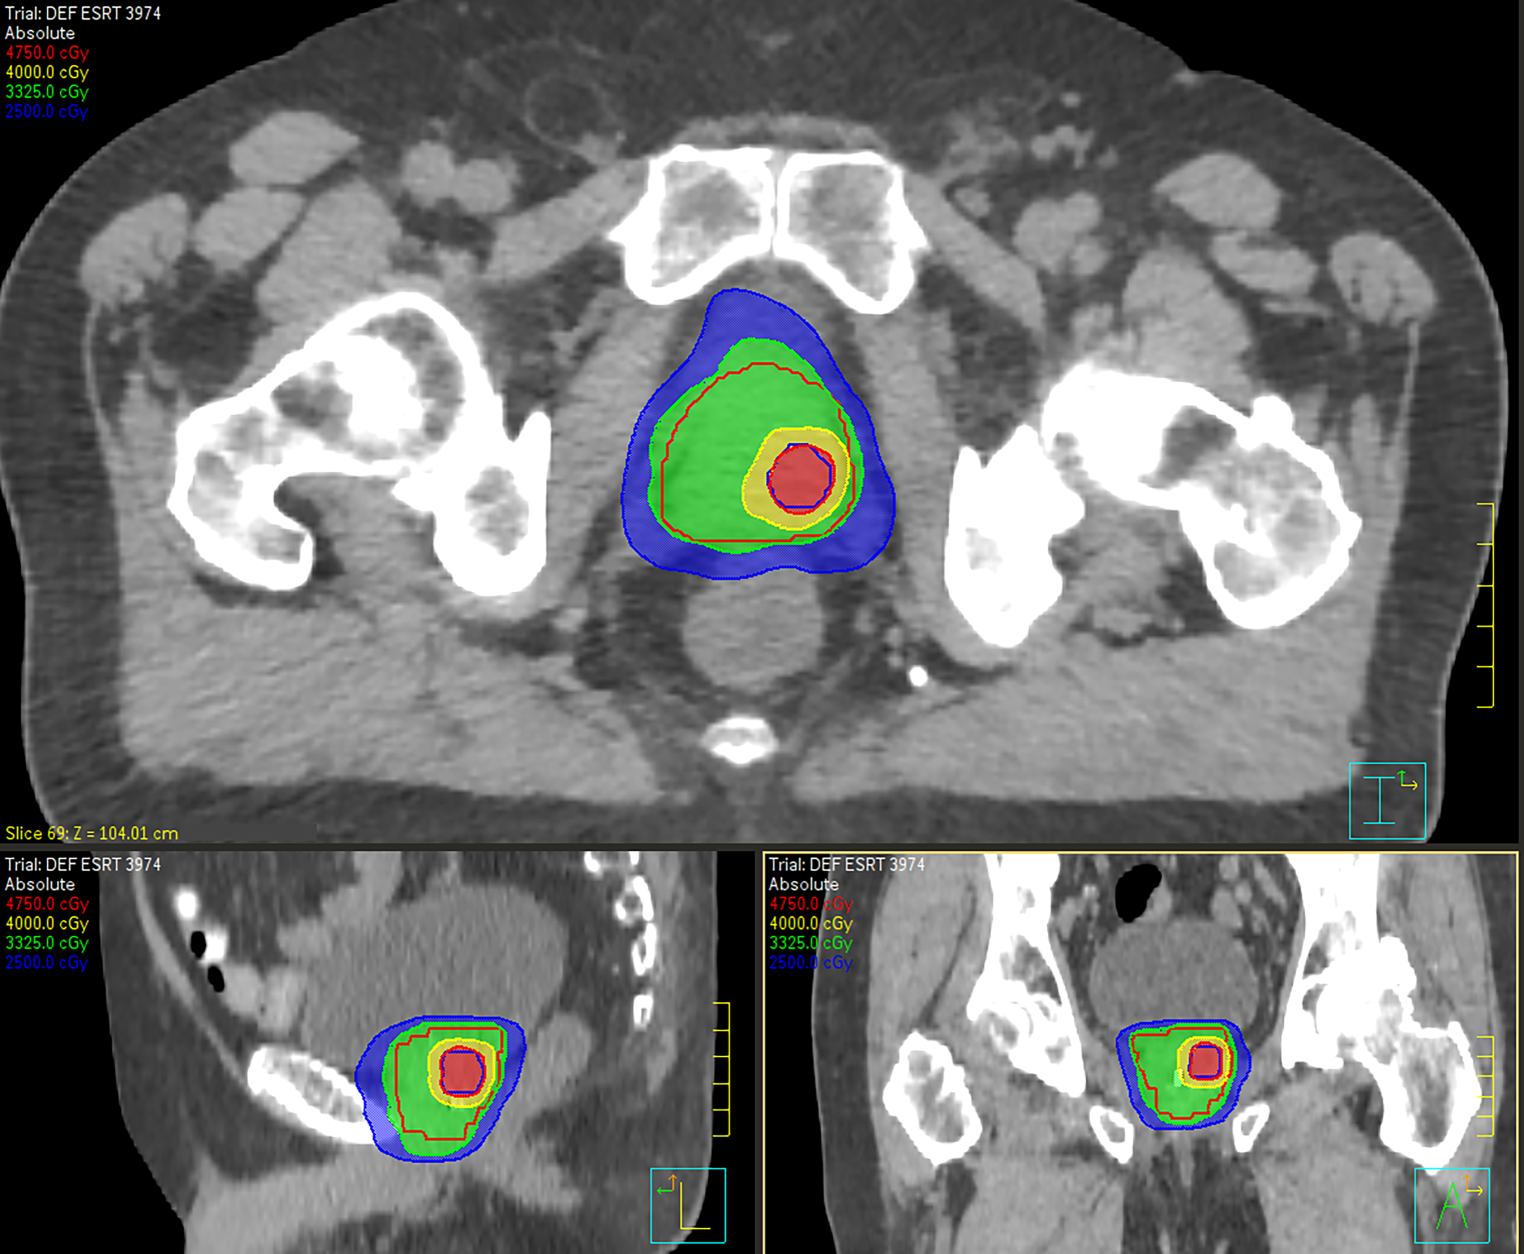 Stereotactic body radiotherapy (SIB-VMAT technique) to dominant intraprostatic lesion (DIL) for localized prostate cancer: a dose-escalation trial (DESTROY-4).